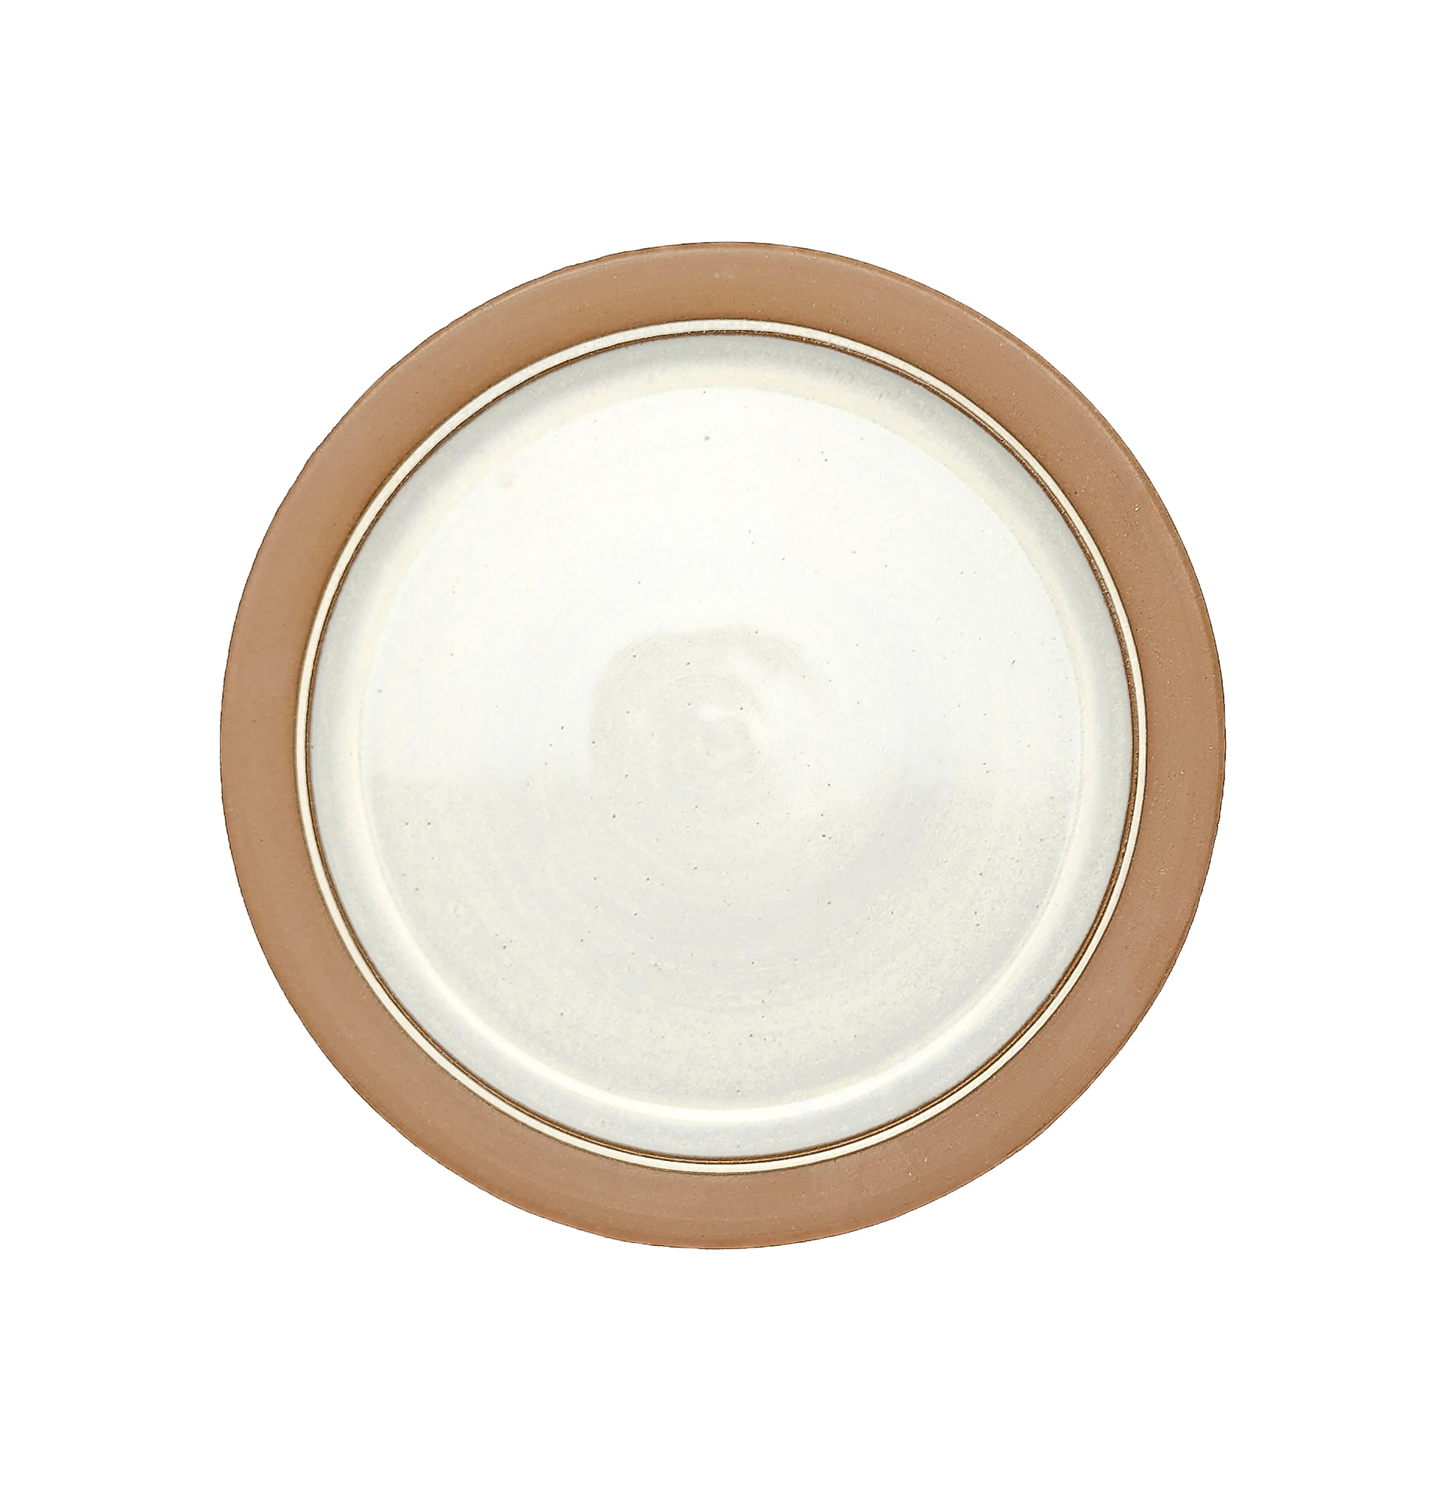 Image Description: A timeless natural (unglazed) dinner plate from Clinton Pottery's Handmade Dinnerware Collection. The 10-inch plate features a rustic and earthy texture, adding a touch of simplicity to your dining setting. Its ample size makes it perfect for serving a delightful dinner with a classic and natural aesthetic.